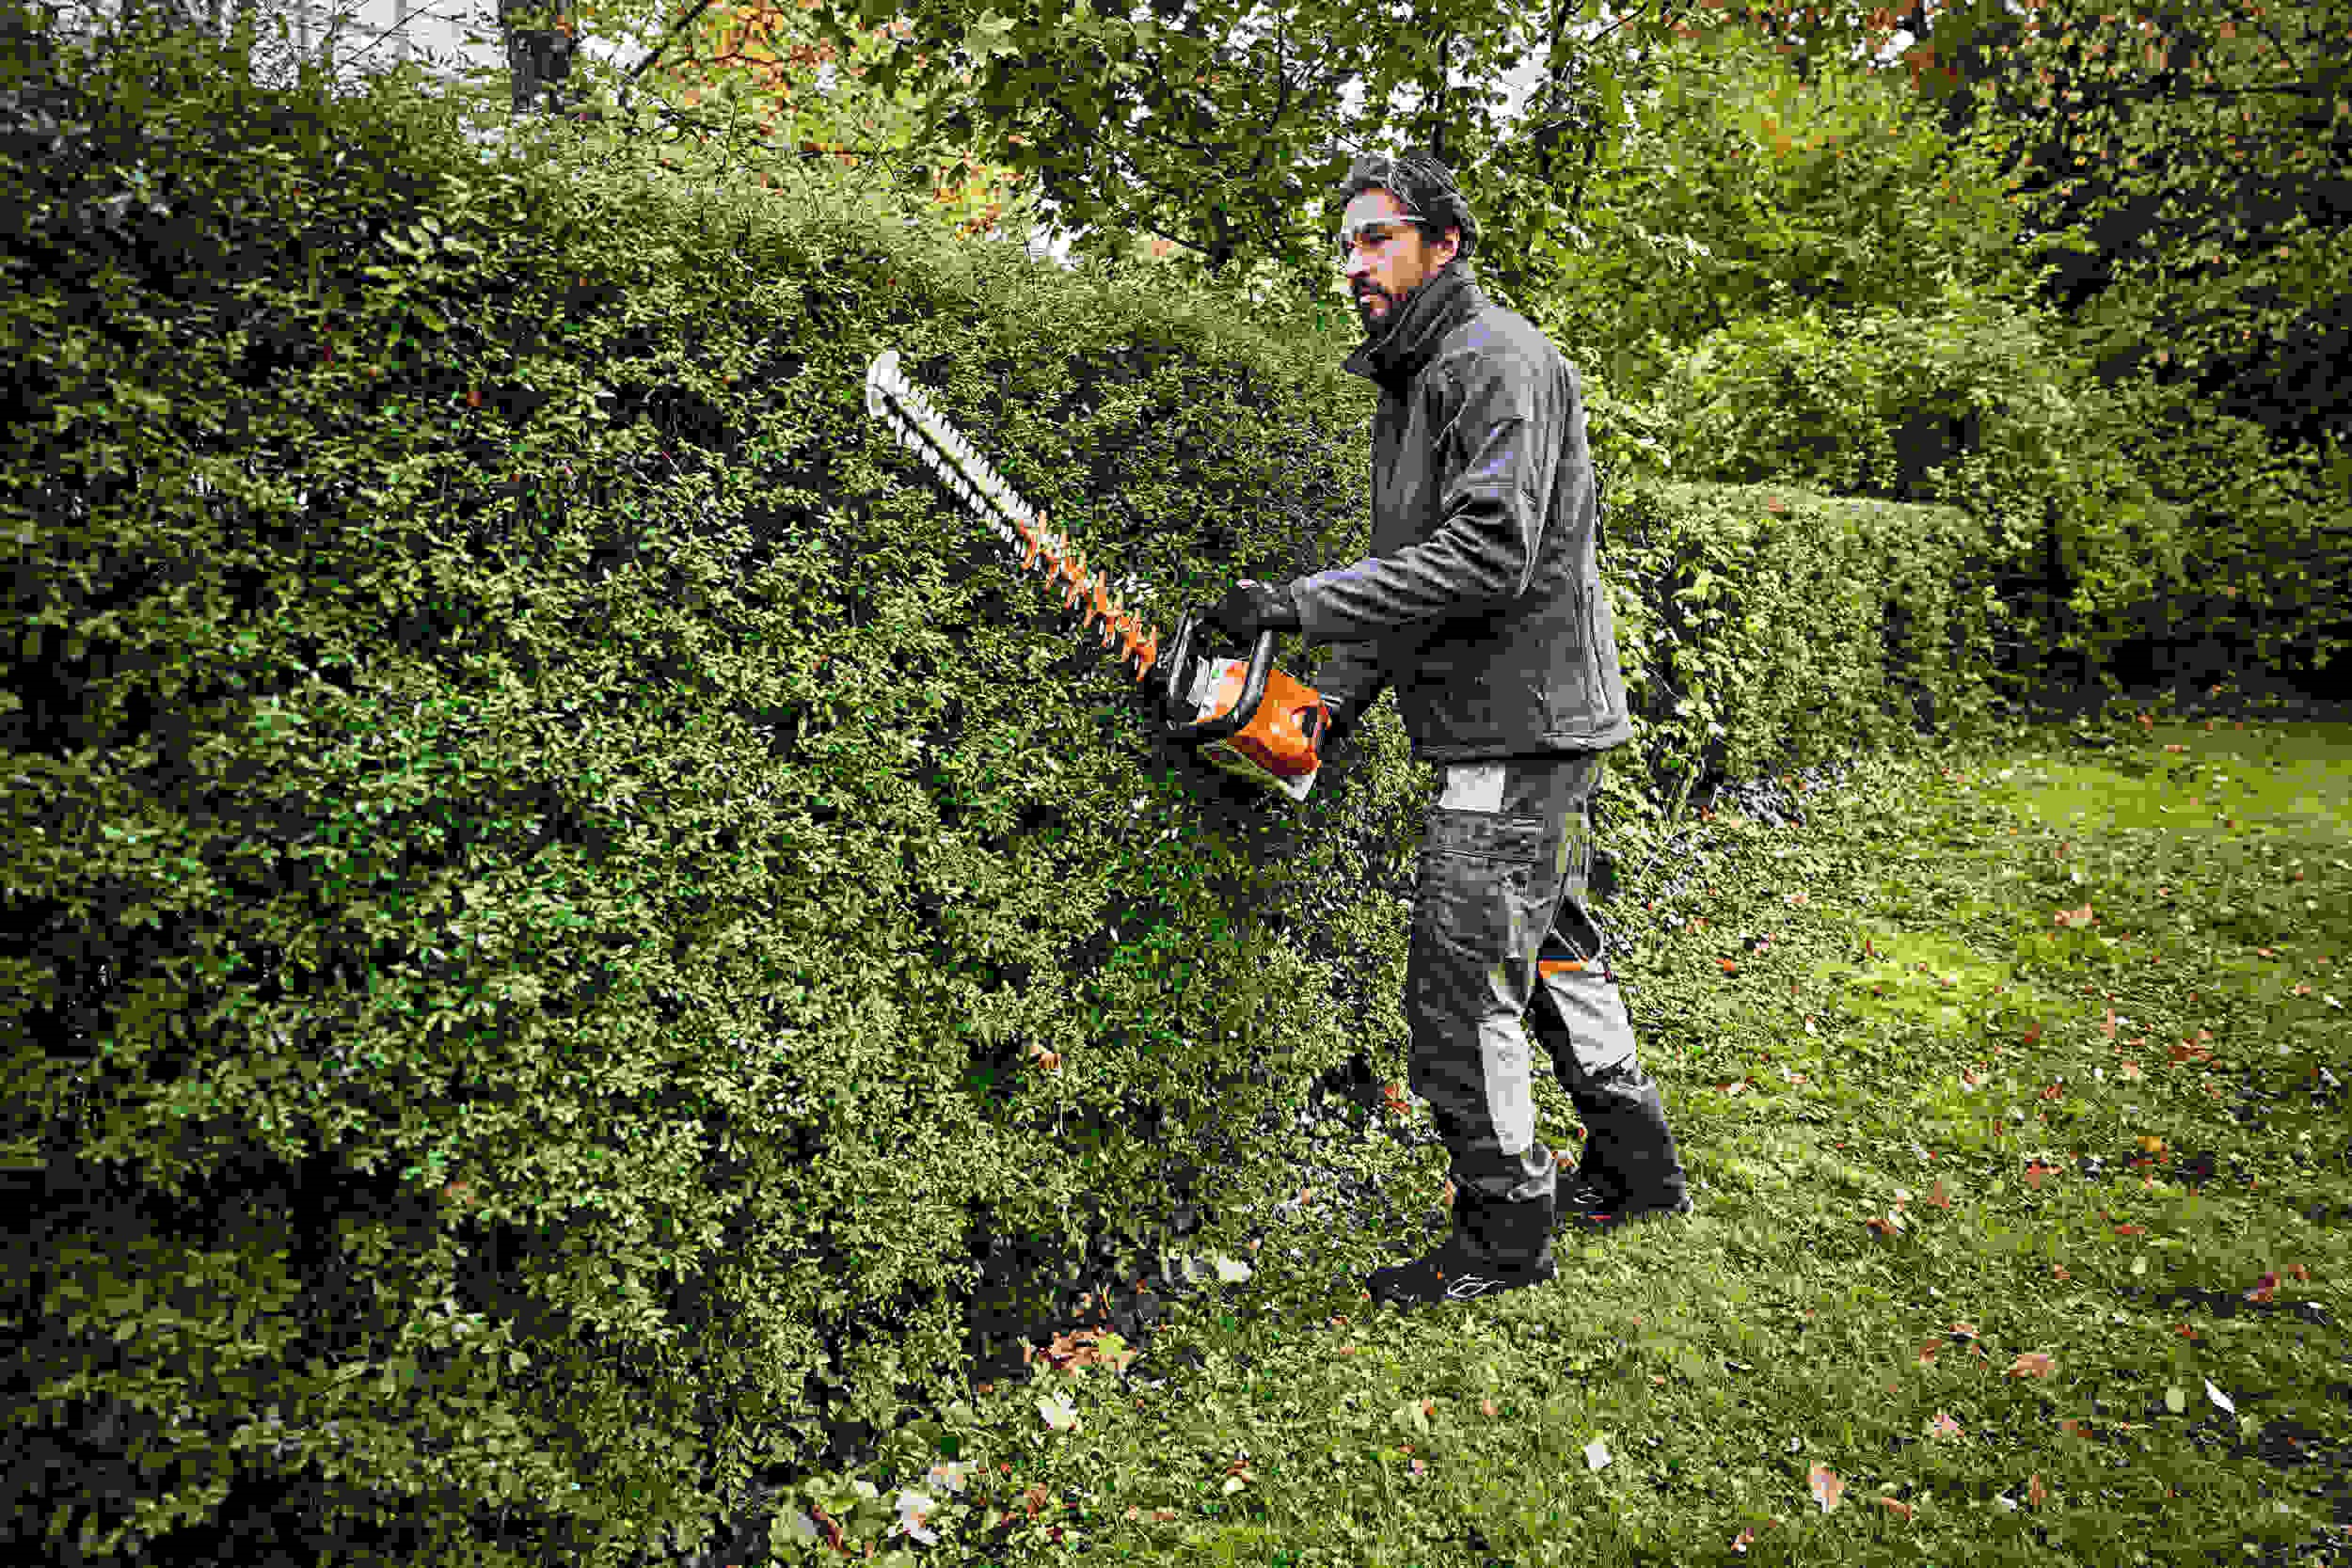 Stihl work clothing for all types of jobs